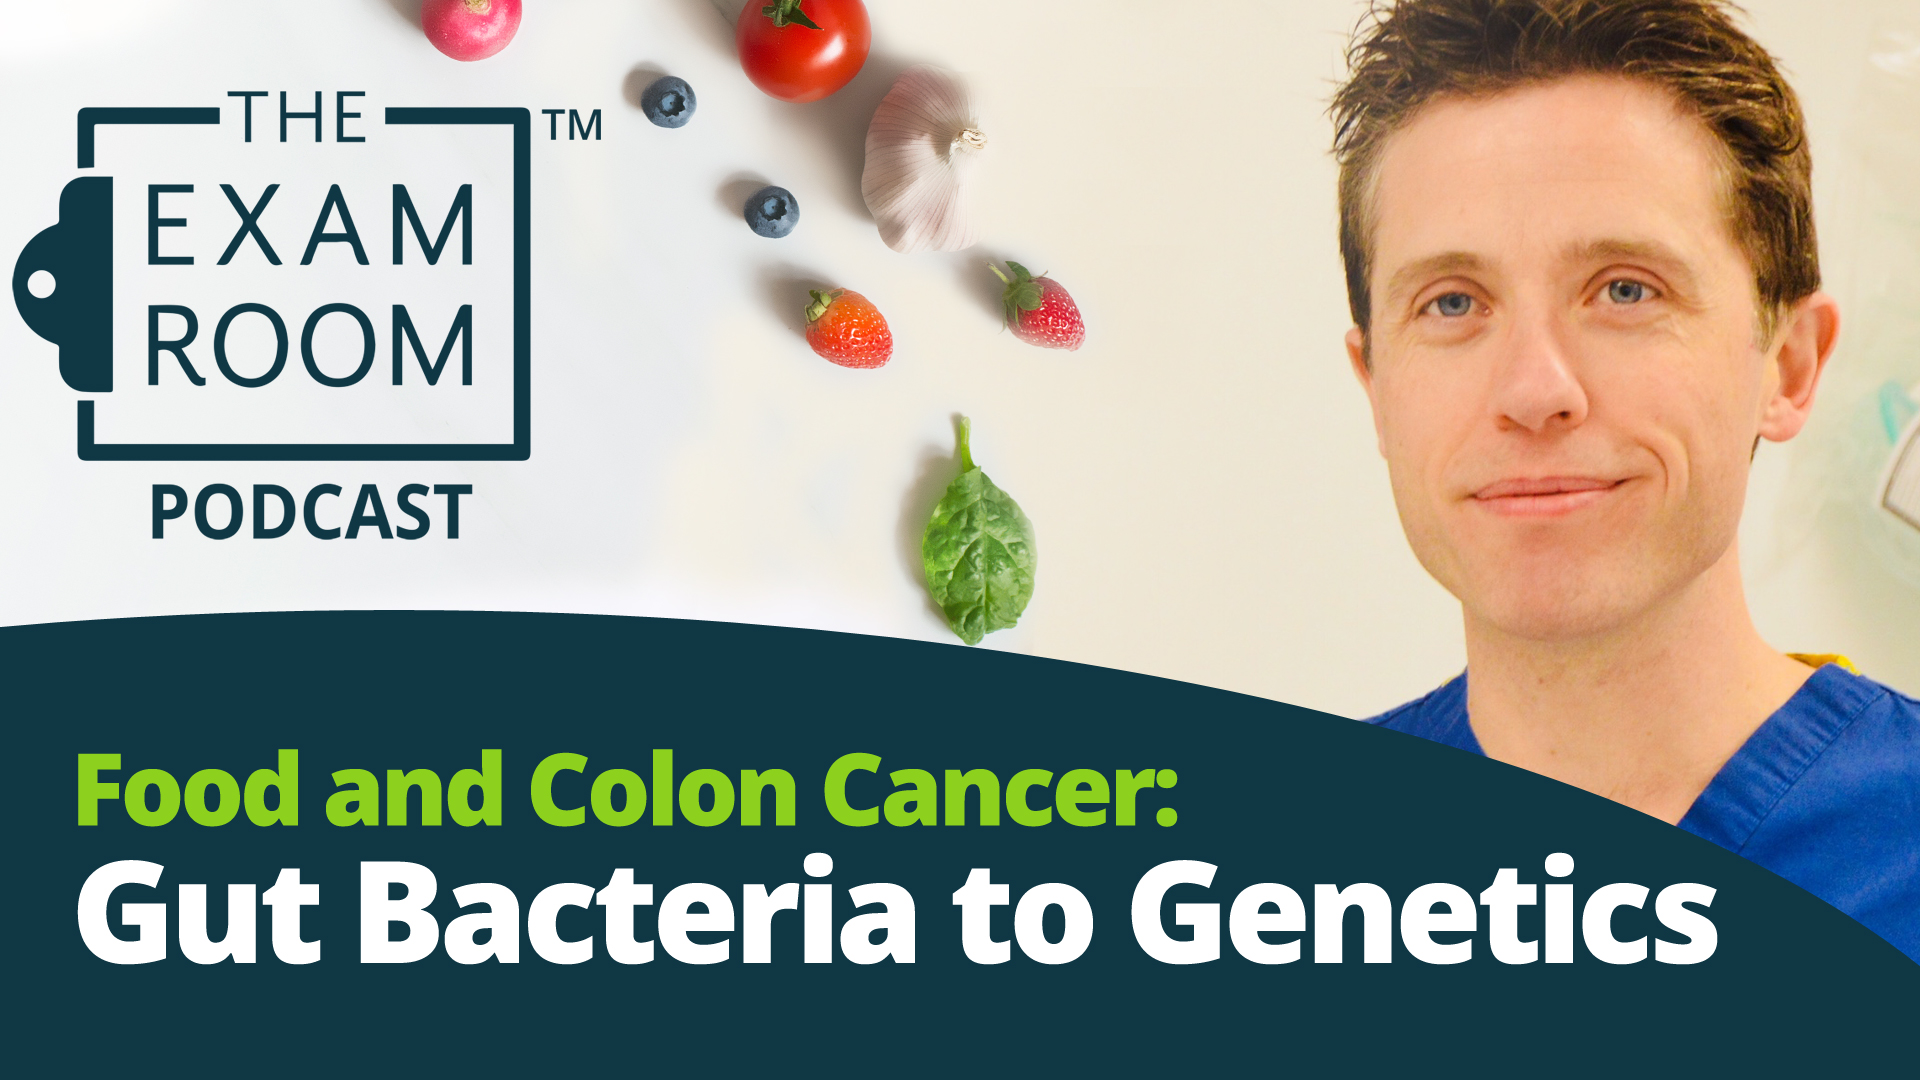 Food and Colon Cancer: Gut Bacteria to Genetics